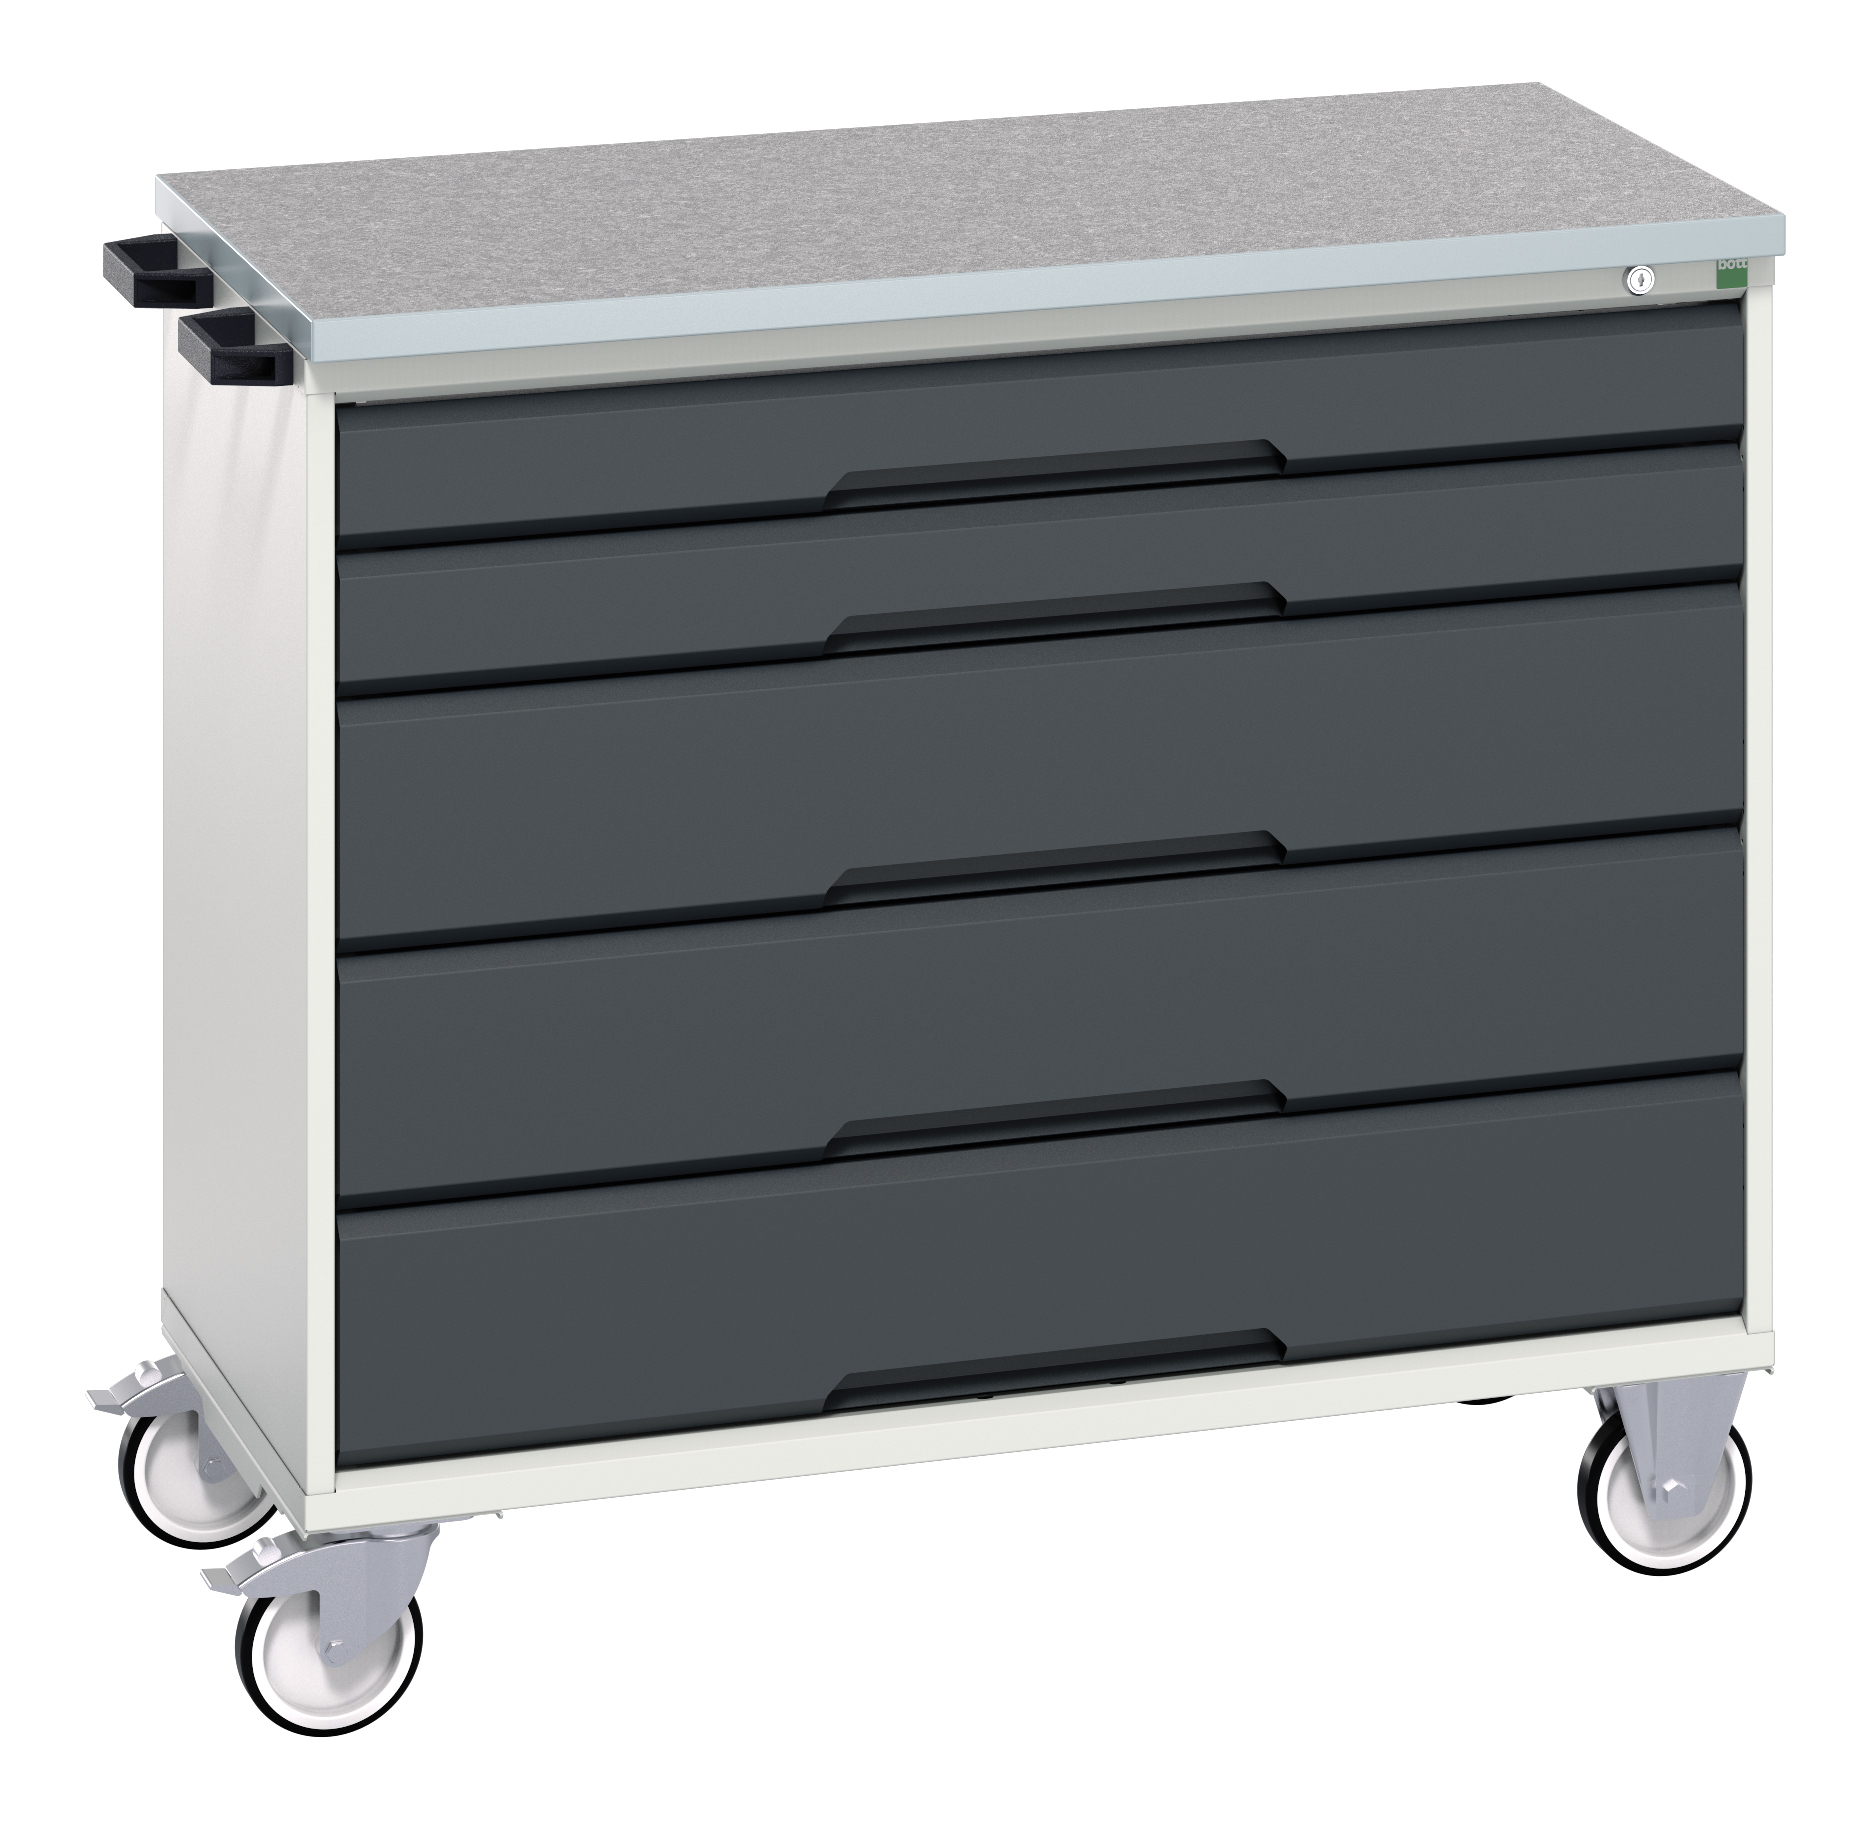 Bott Verso Mobile Drawer Cabinet With 5 Drawers & Lino Top - 16927050.19